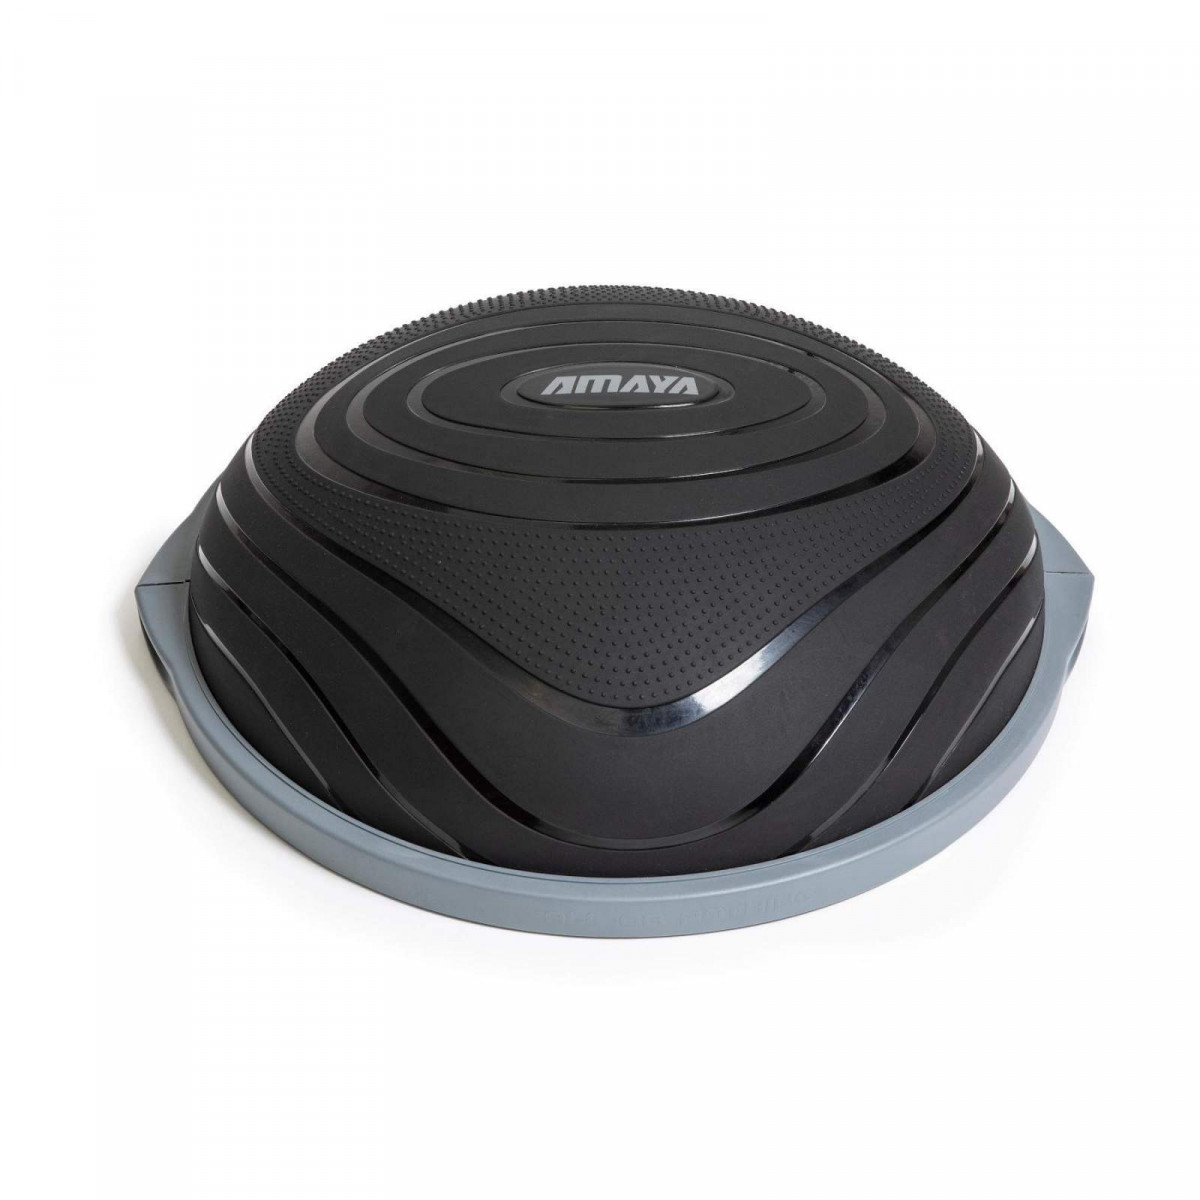 Dome "Air Step Pro"